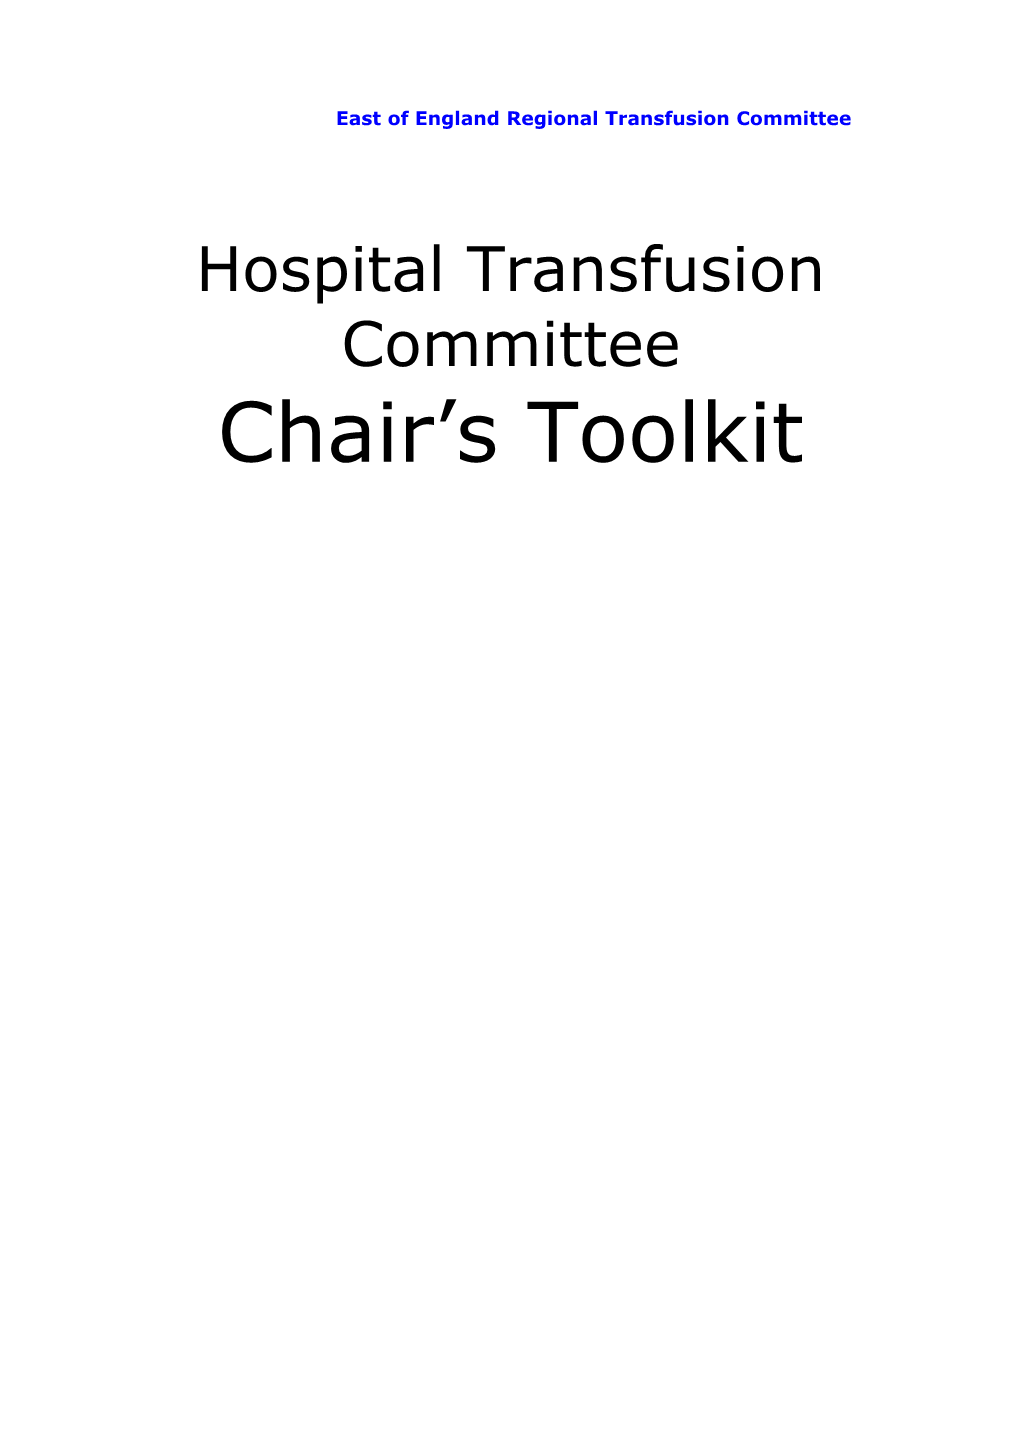 East of England Regional Transfusion Committee